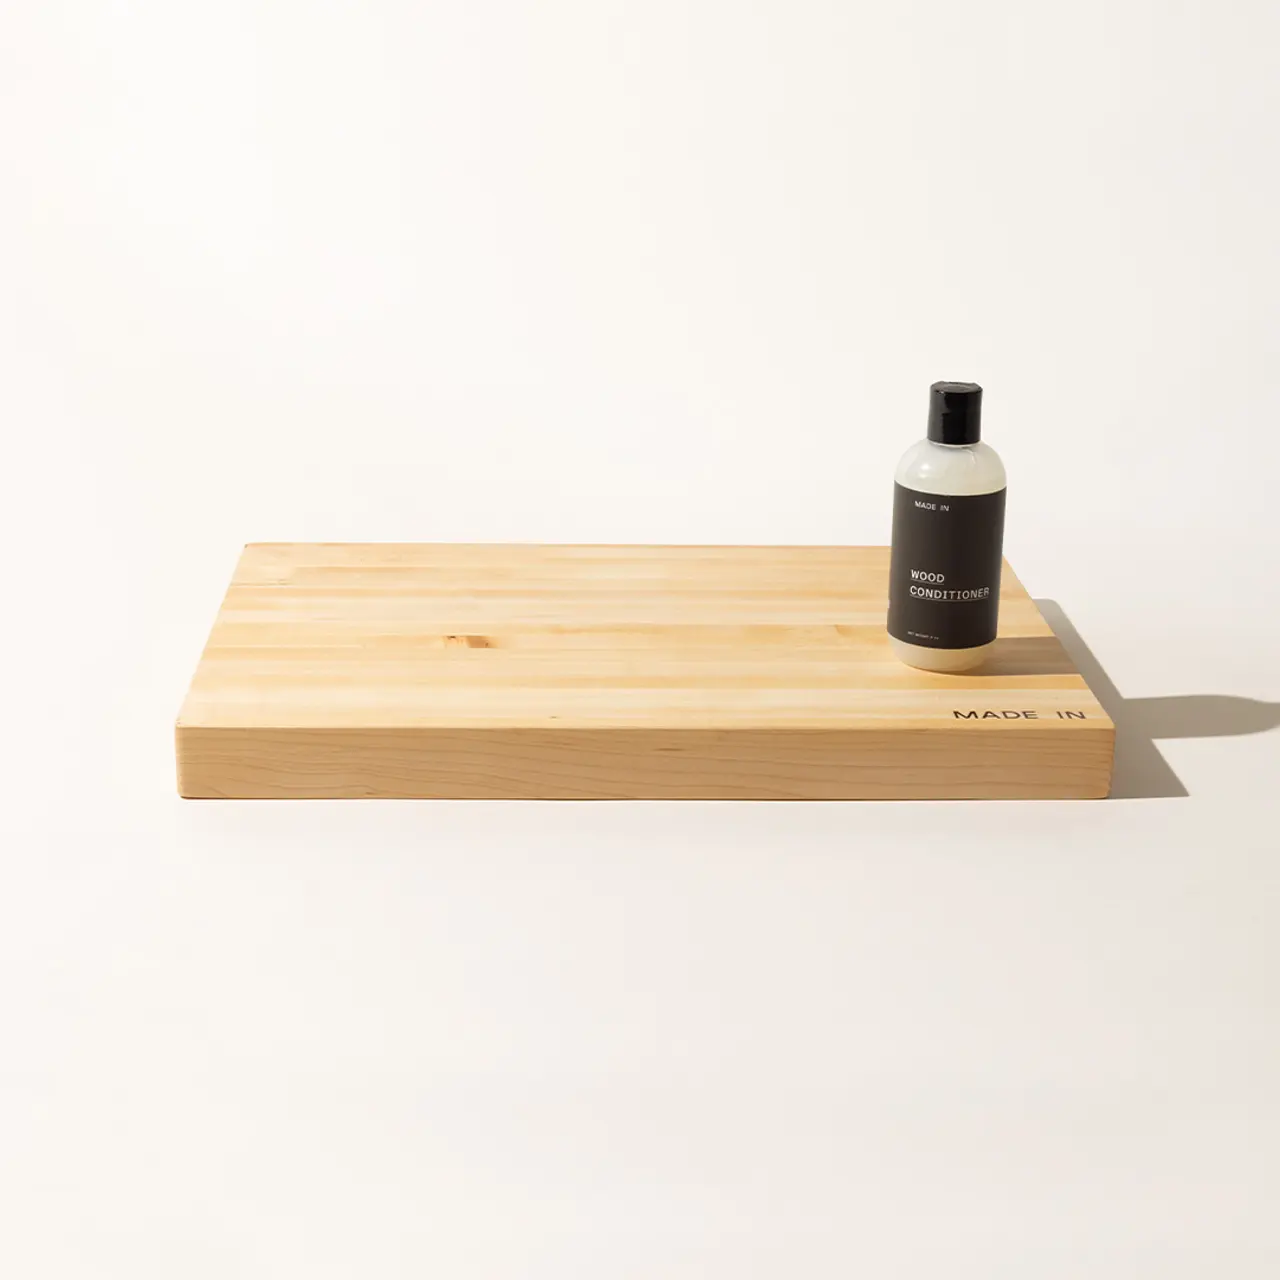 A wooden board with a dark-colored bottle labeled "Aesop" rests on a neutral background.